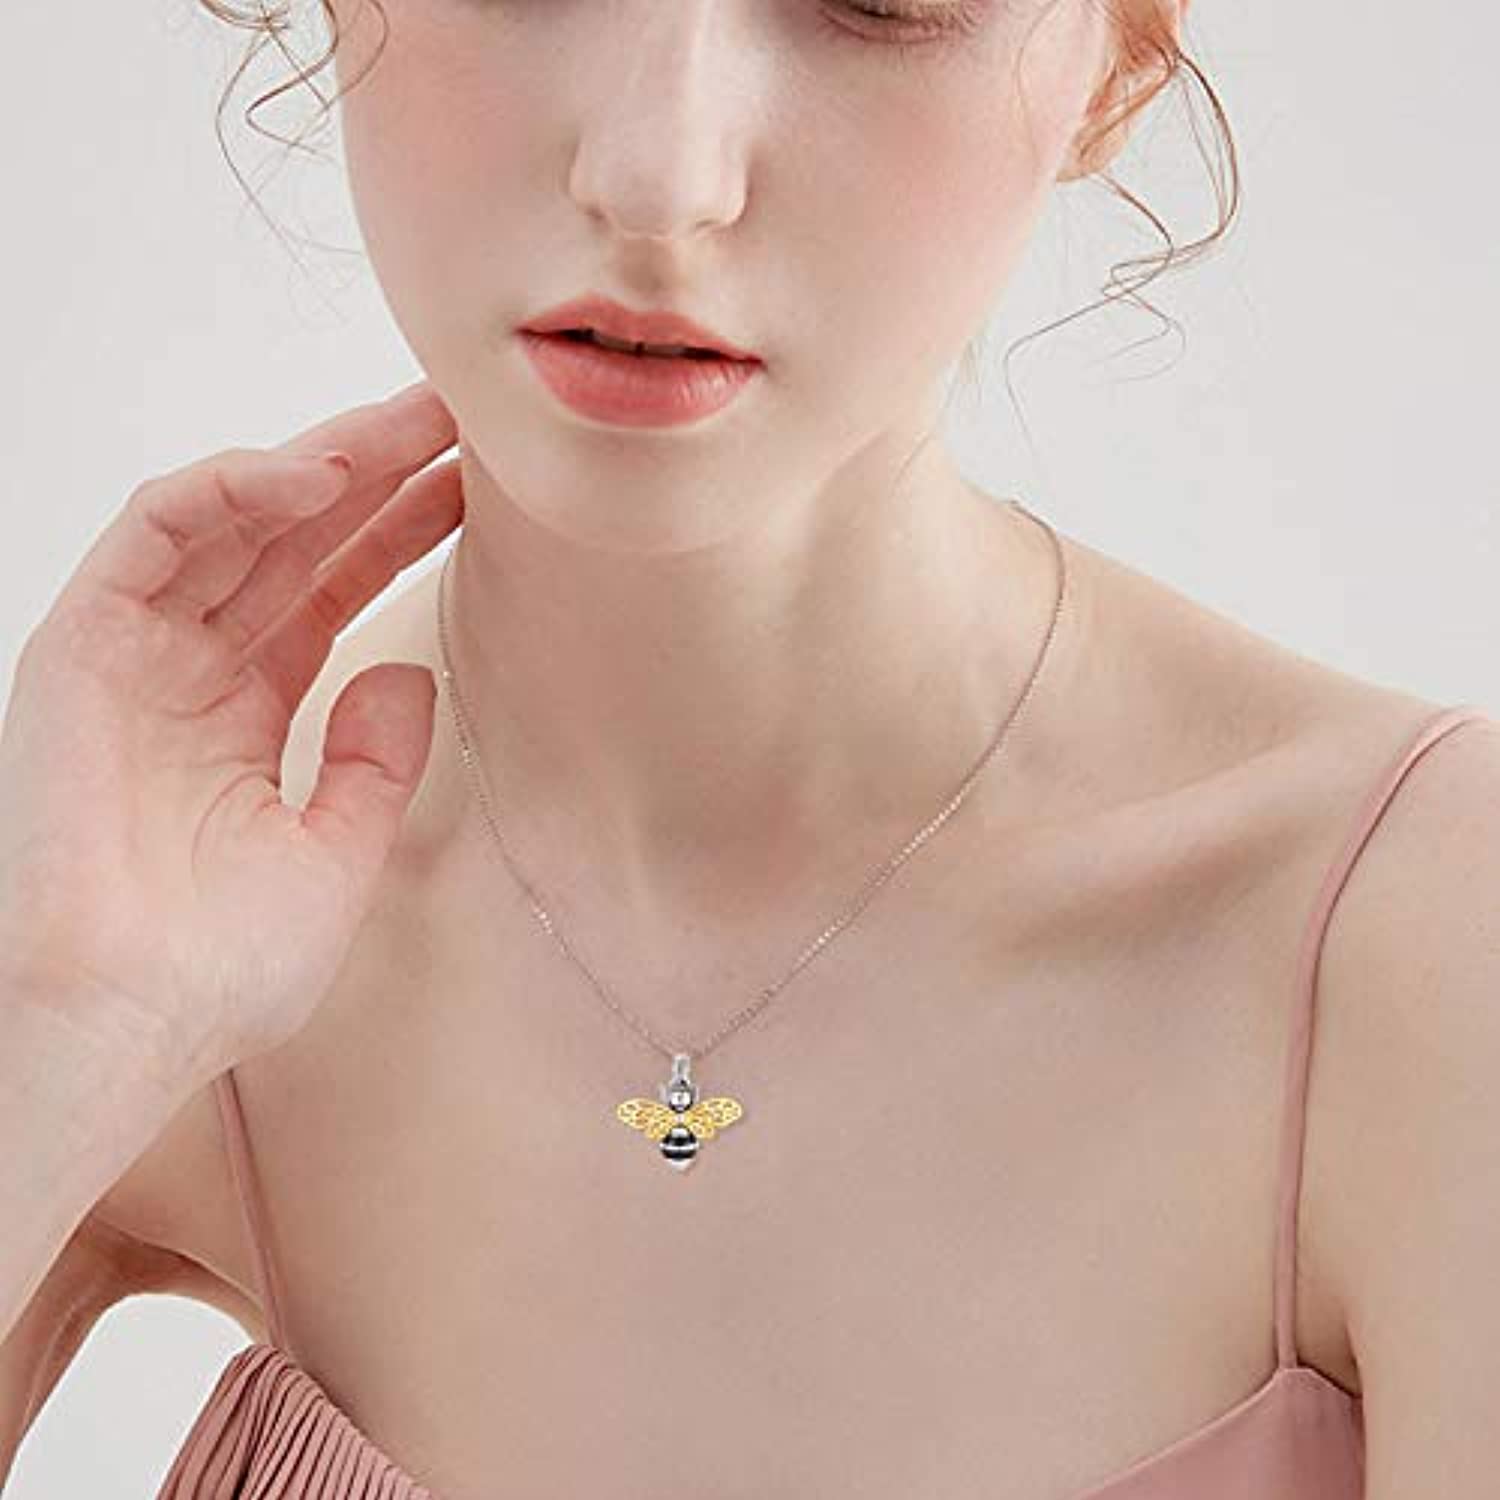 Queen Bee Necklace – Living Forever Memories - For then, For now, Forever.